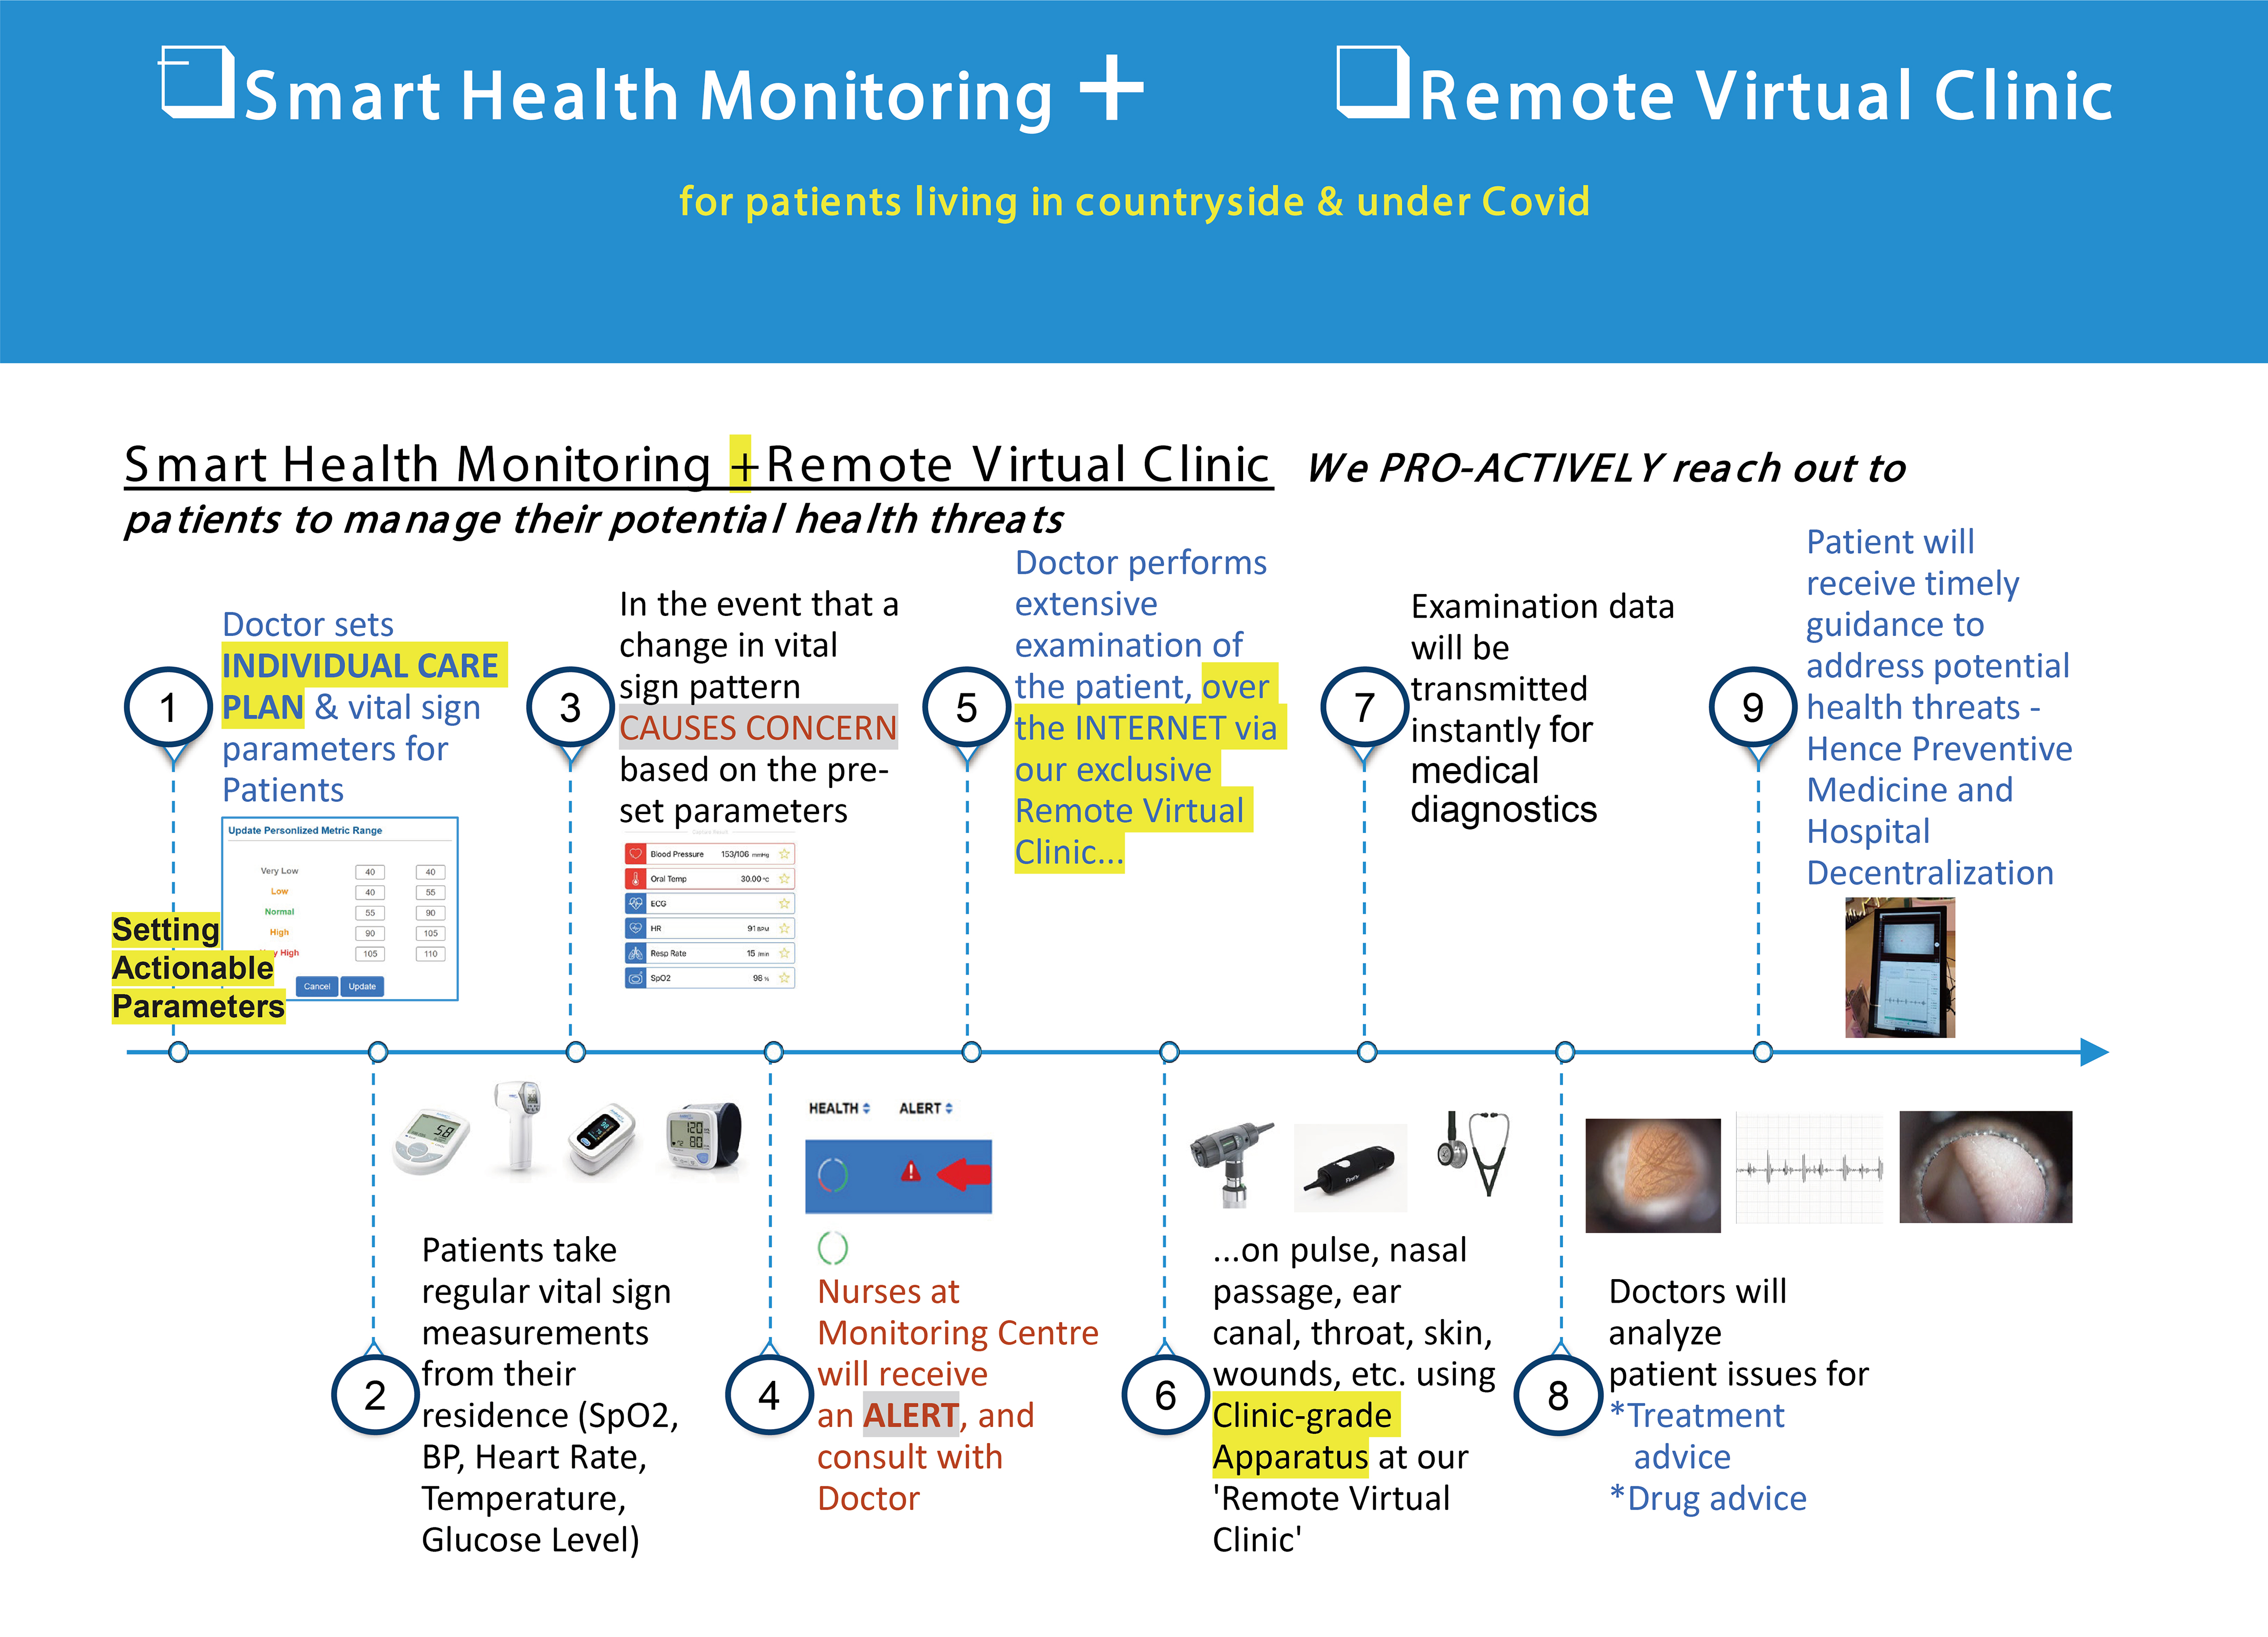 Smart Health Monitoring and Remote Virtual Clinic - for patients living in countryside & under Covid